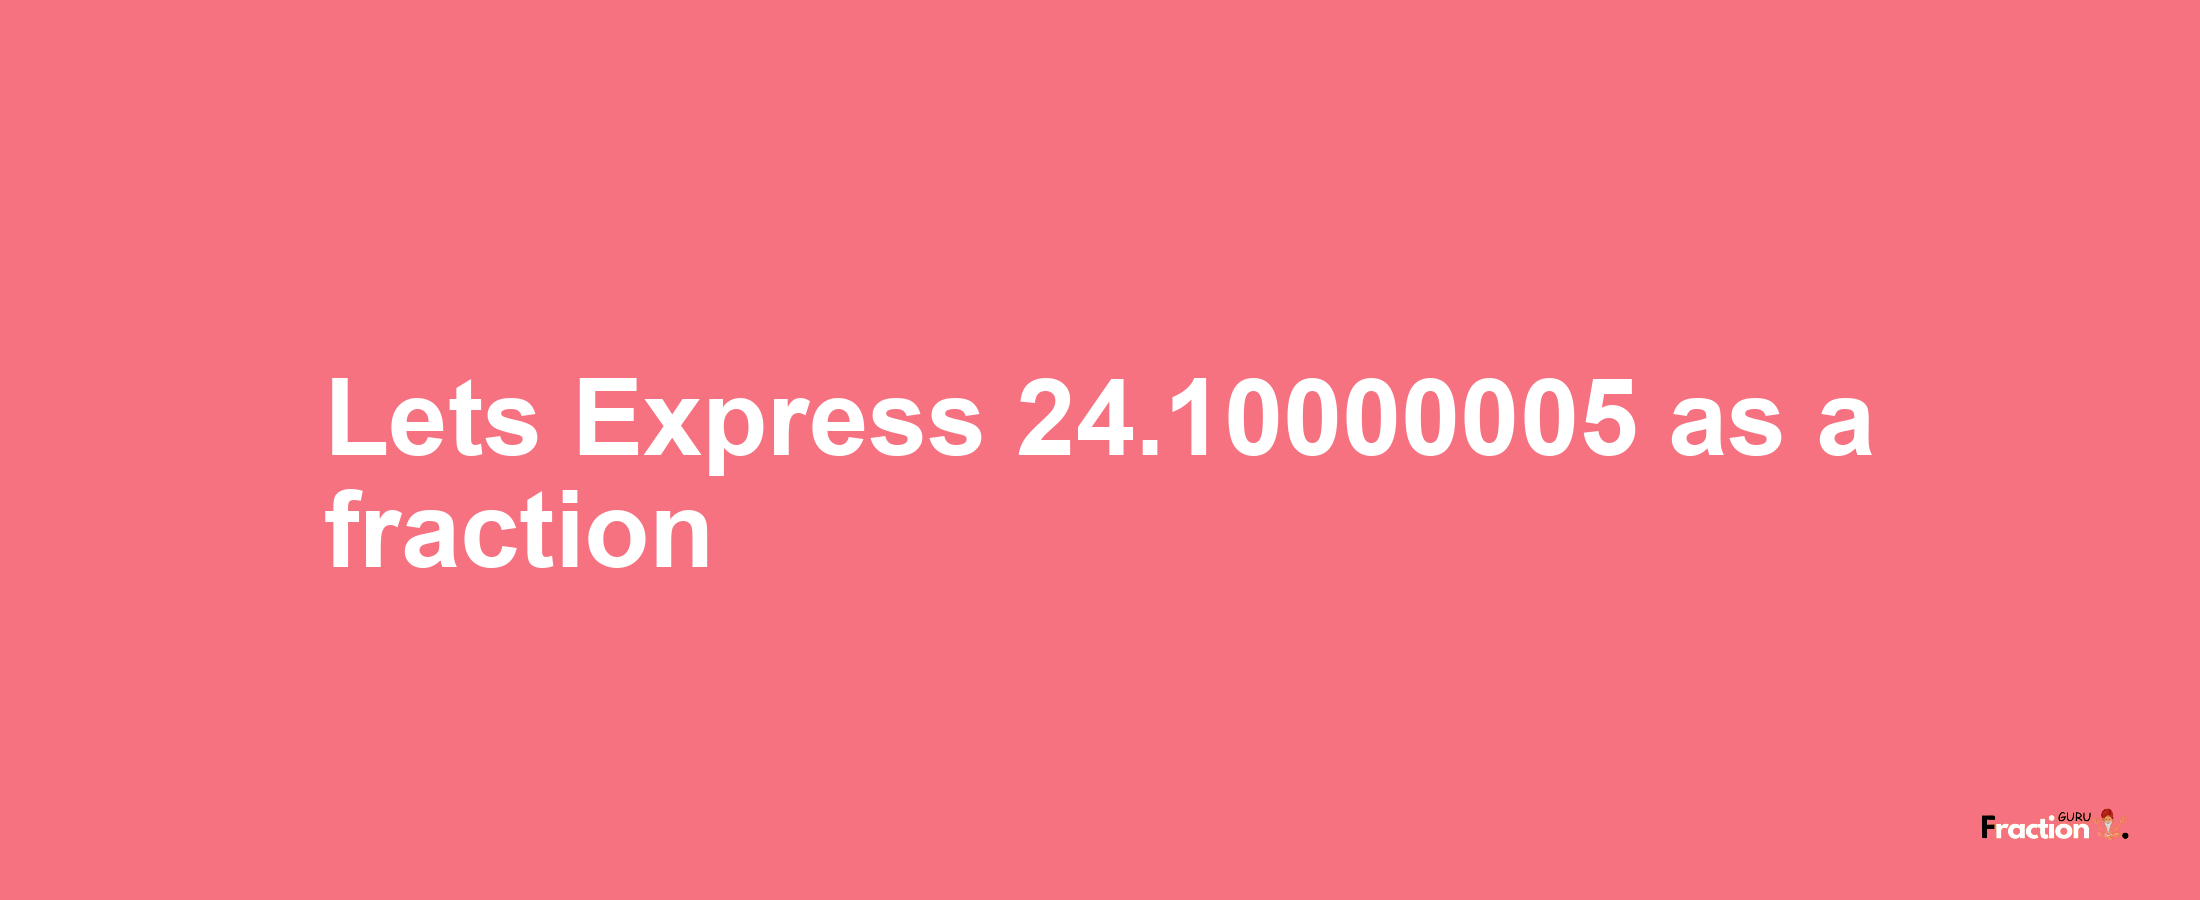 Lets Express 24.10000005 as afraction